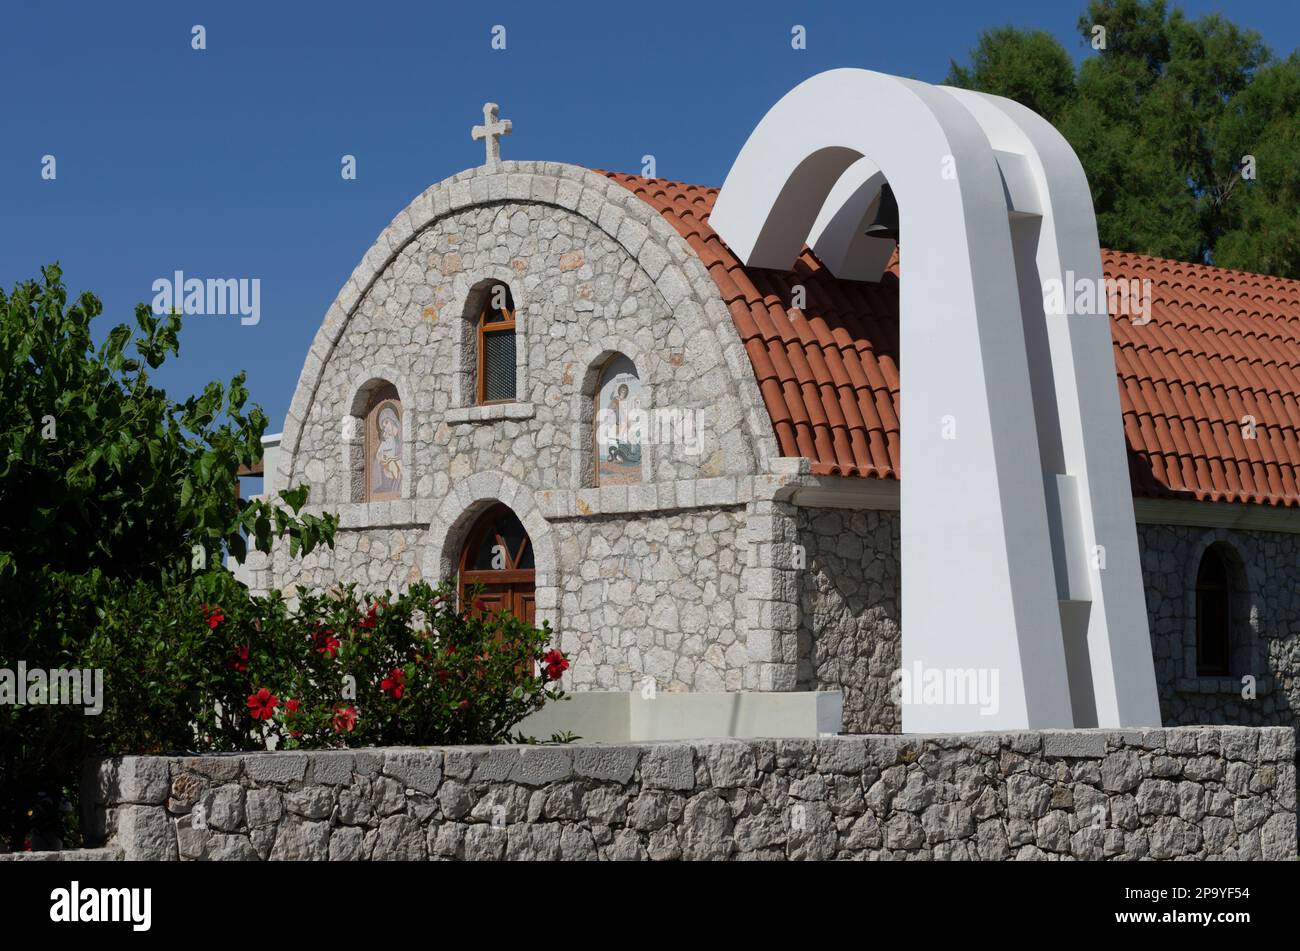 Kolymbia, Rhodes, Greece - May 25, 2019: Stone Orthodox Church with icons on the facade and ventilation system Stock Photo